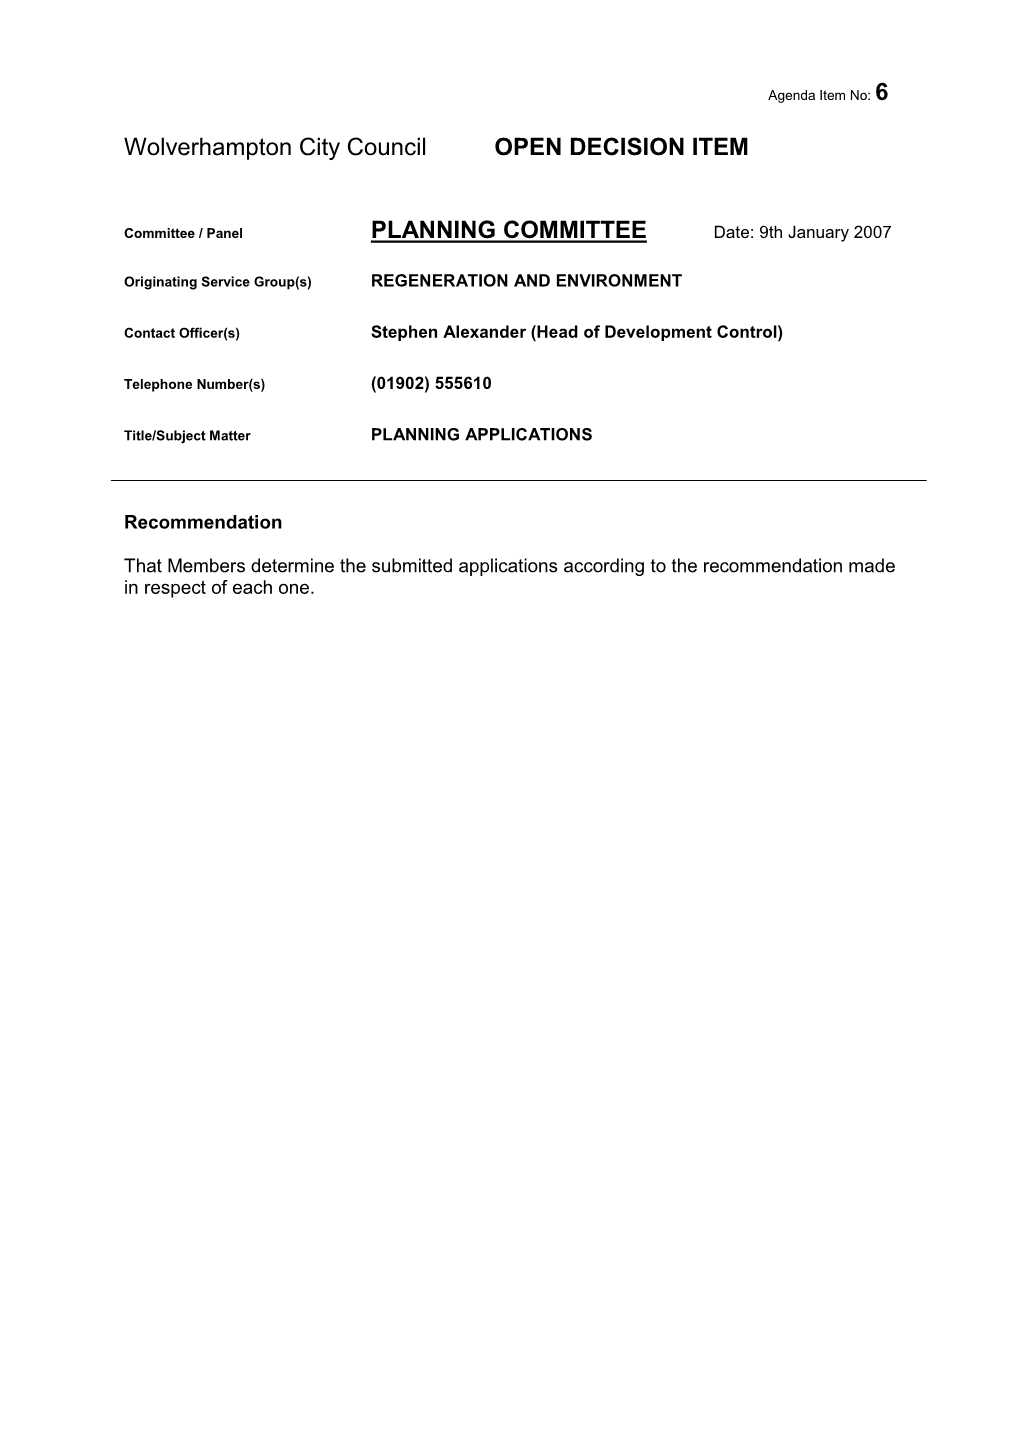 PLANNING COMMITTEE Date: 9Th January 2007